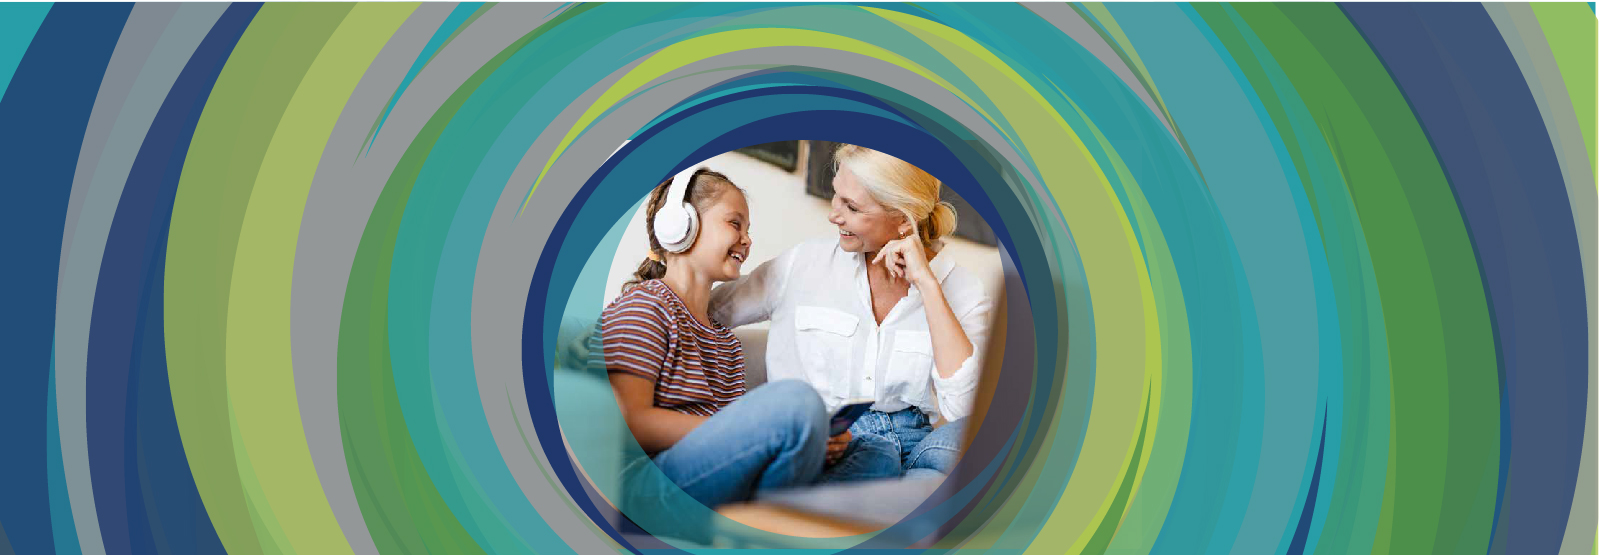 Woman and young girl with headphones laughing.